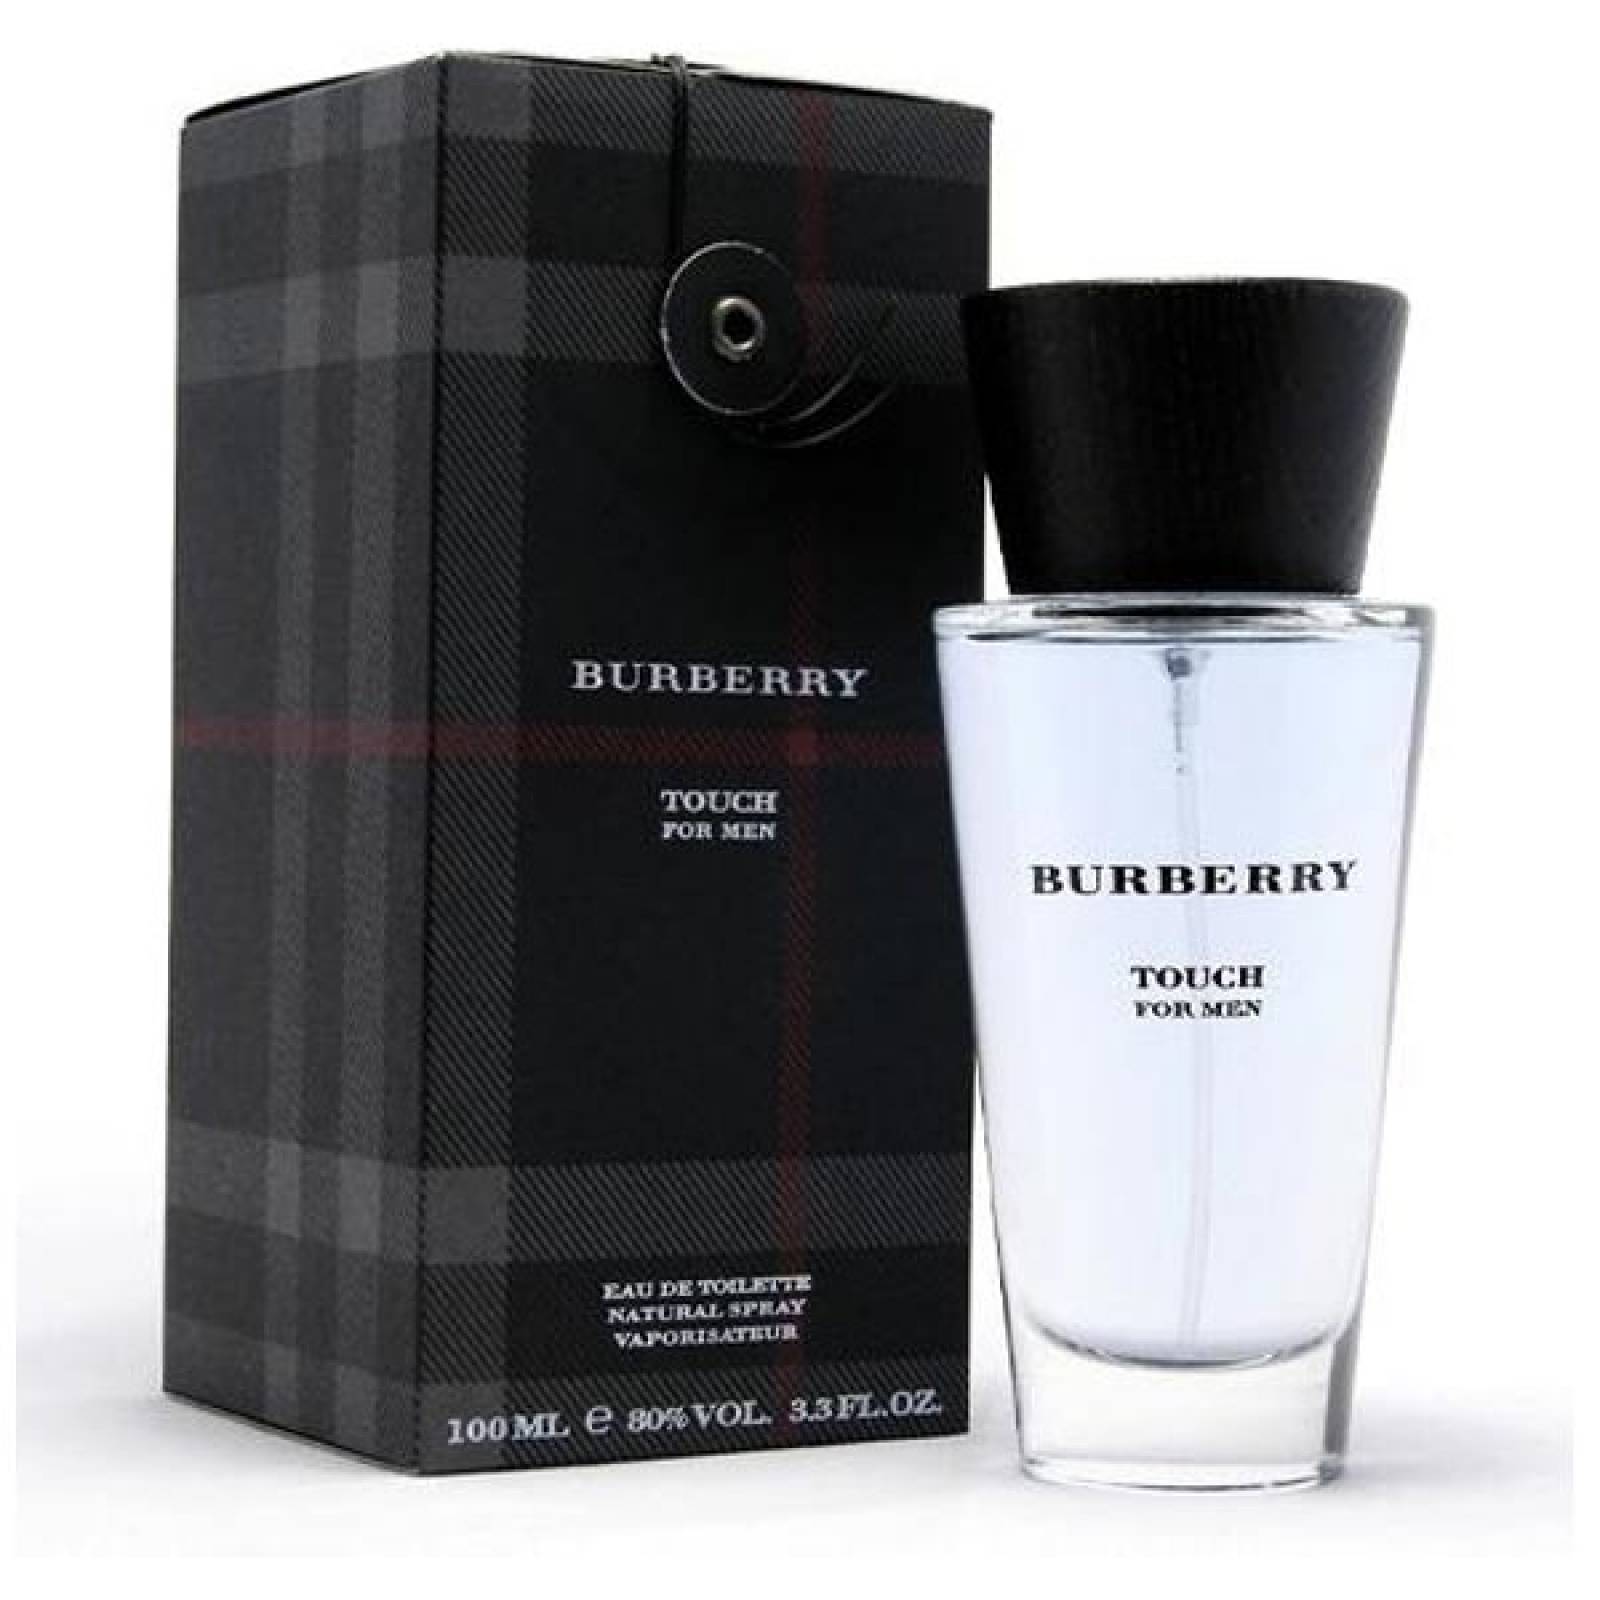 BURBERRY TOUCH 100 ML CABALLERO